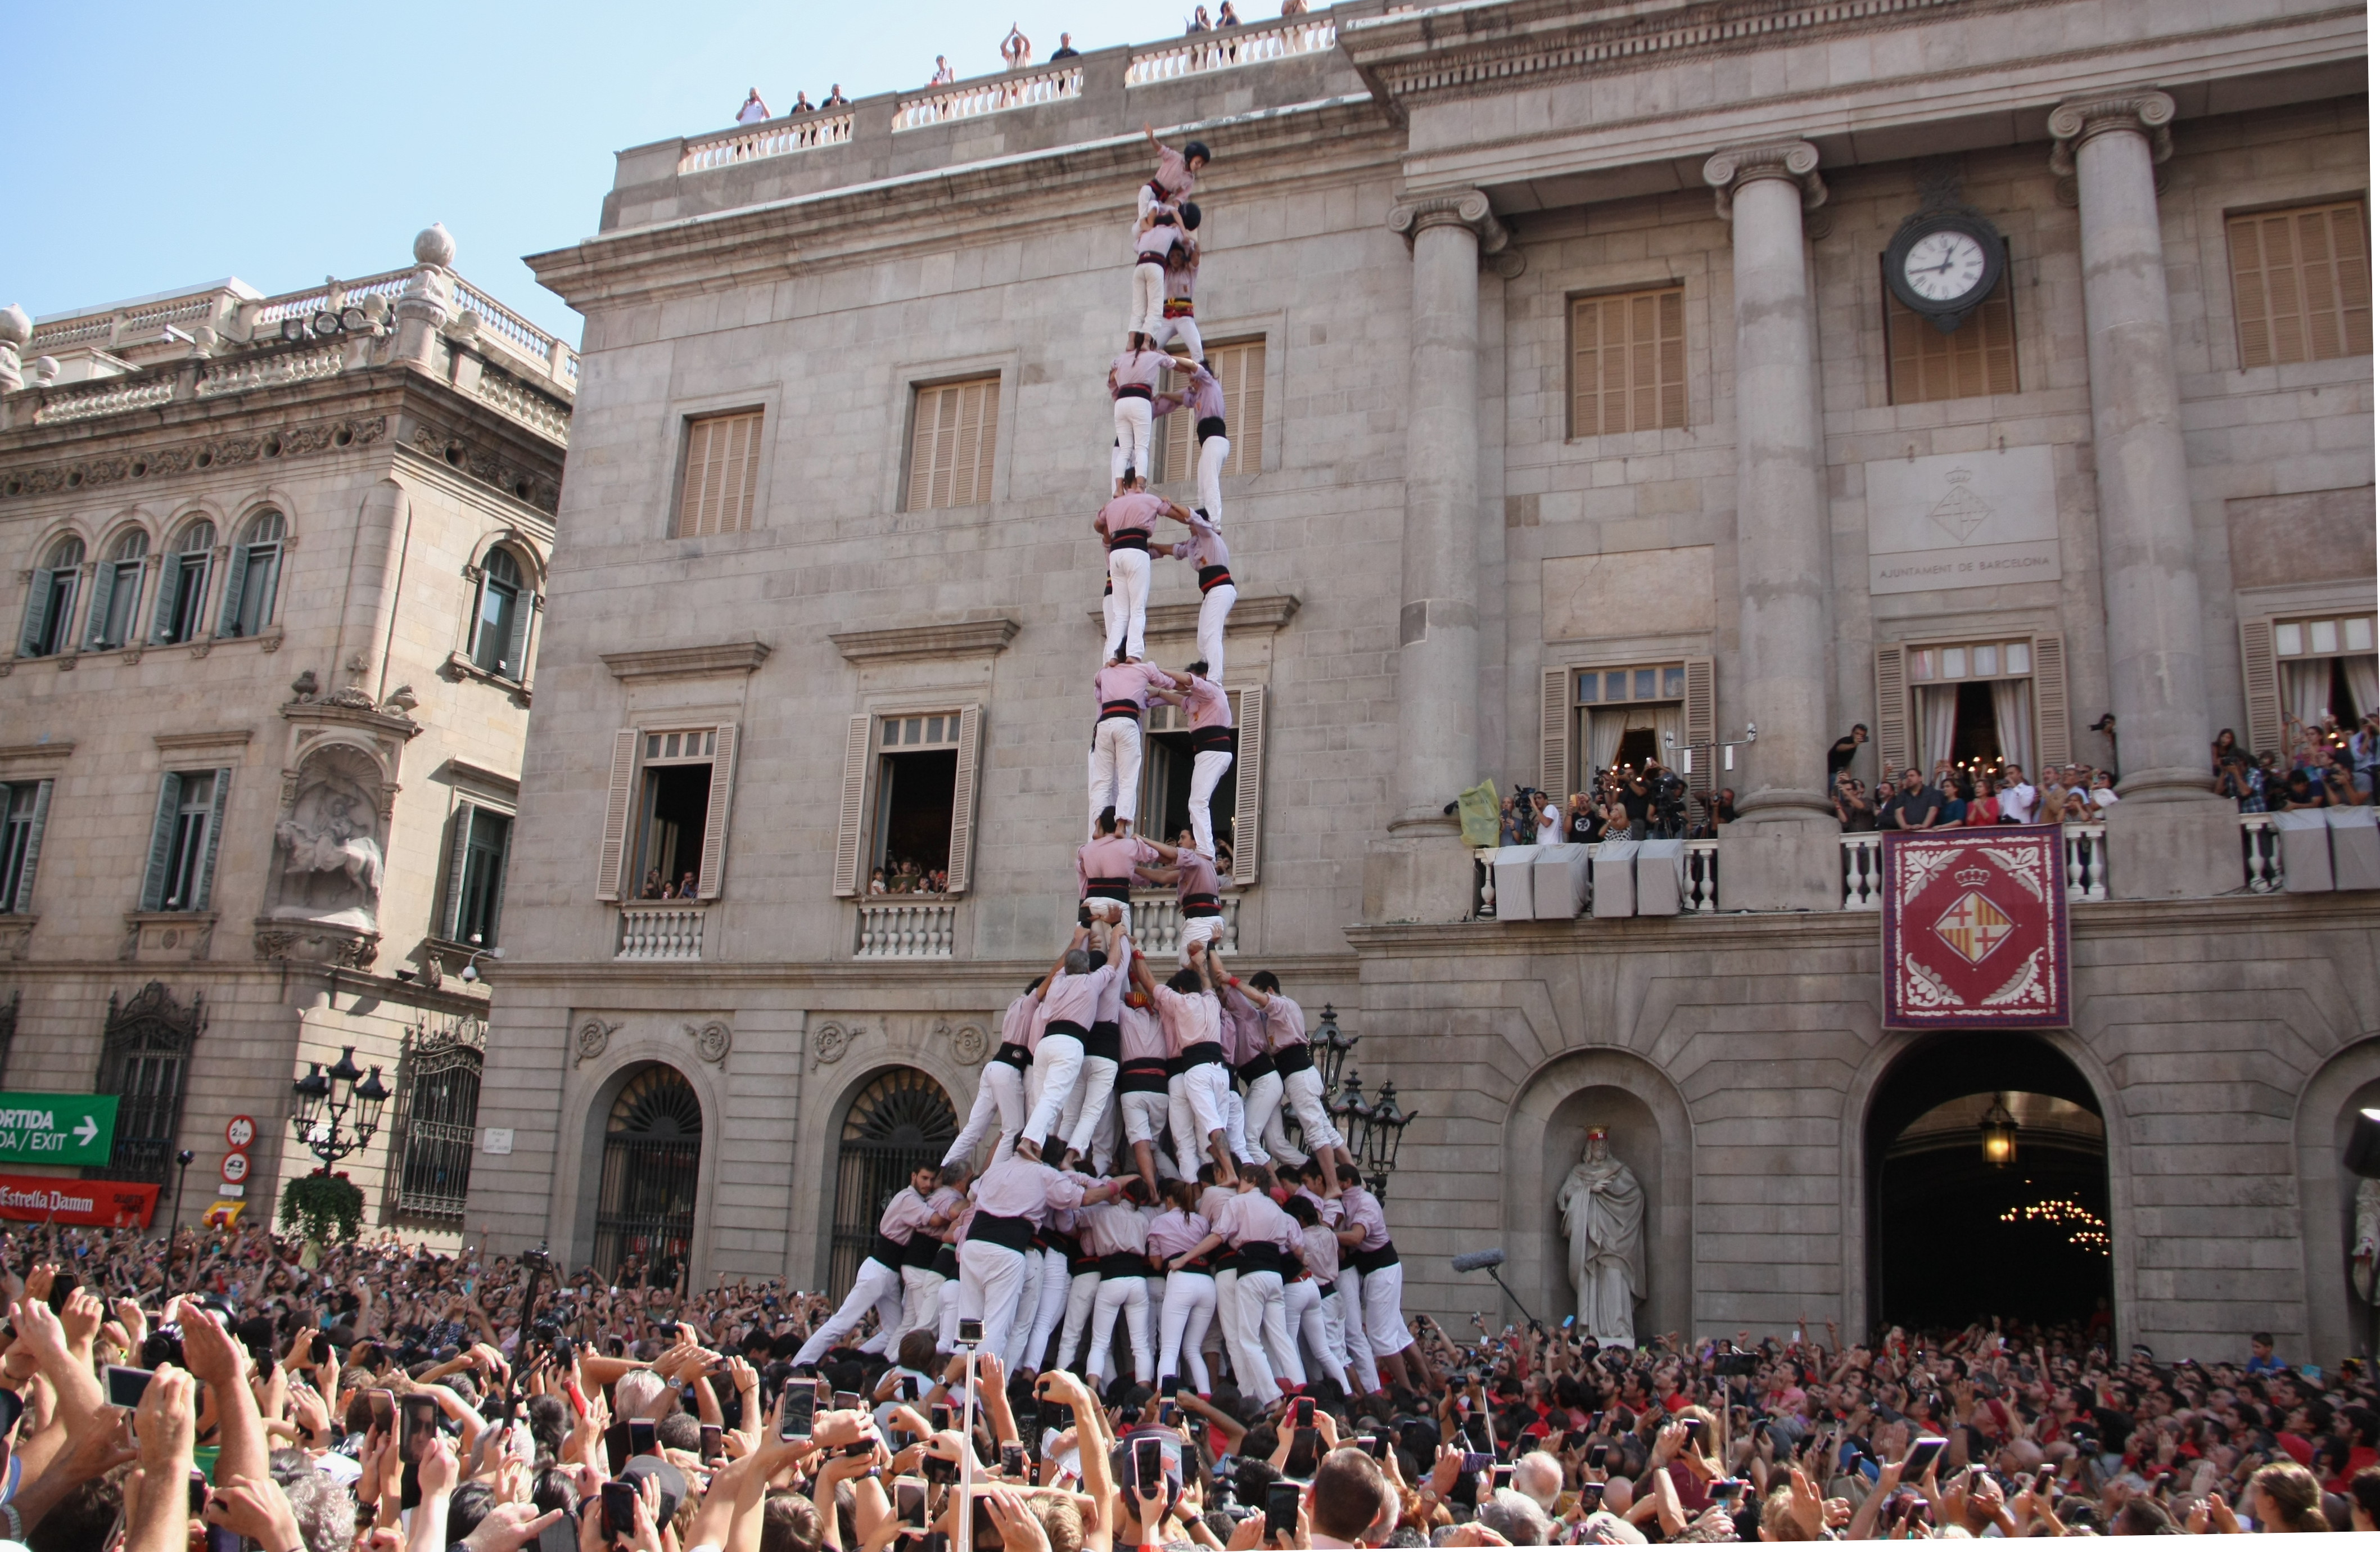 ‘Els Minyons de Terrassa’ achieved the first human tower of 10 levels with three people on each ever seen in the city (by J.Pérez)